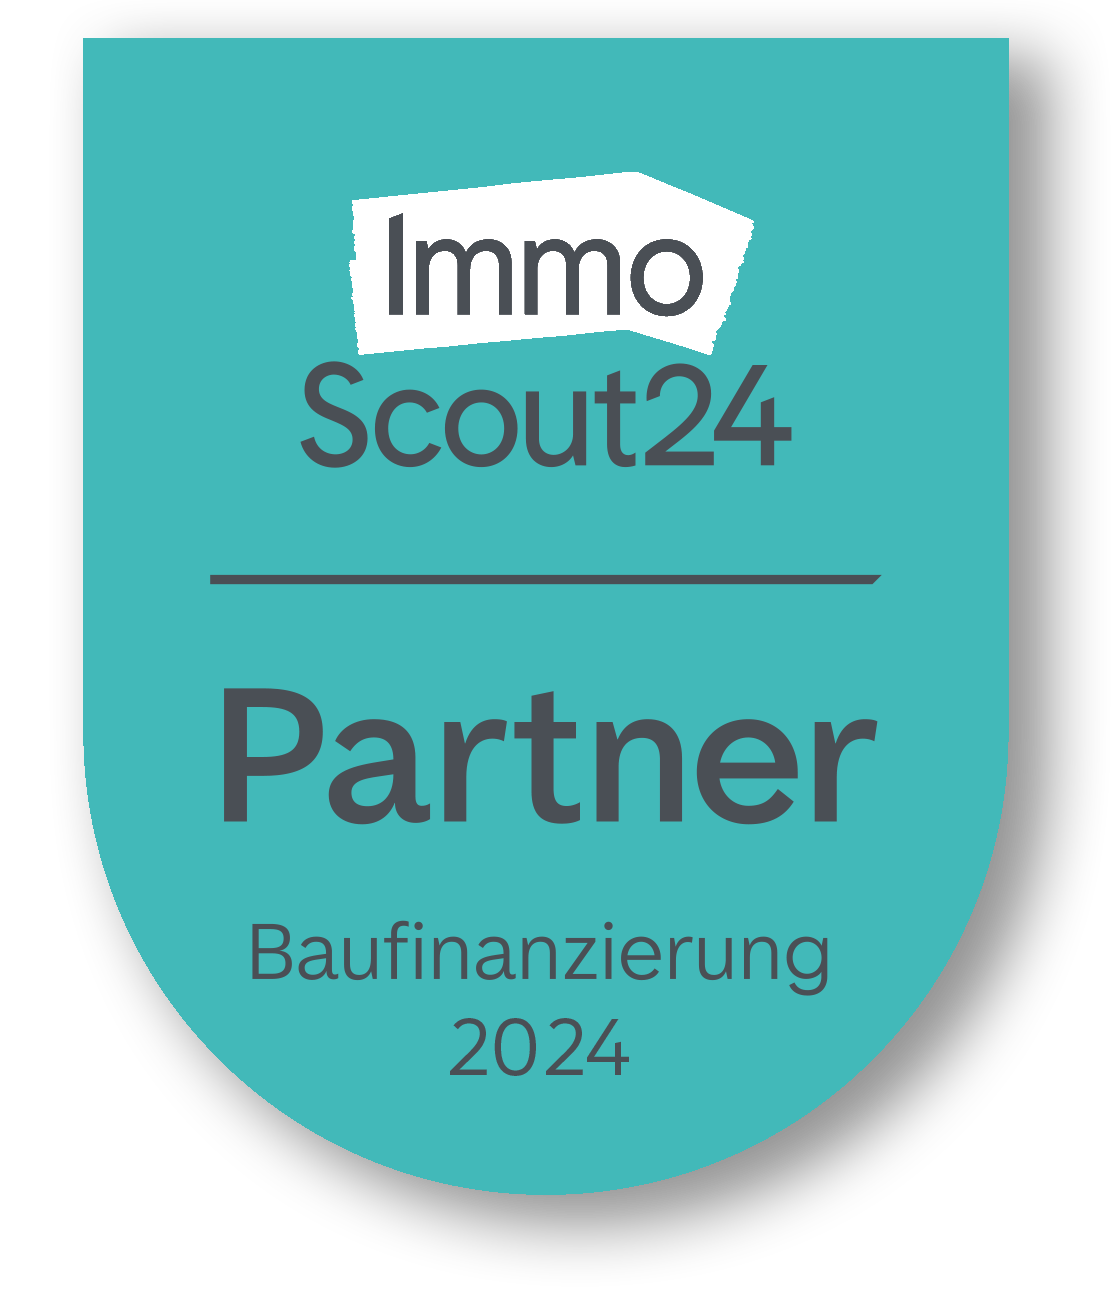 Immoscout24 Partner 2024